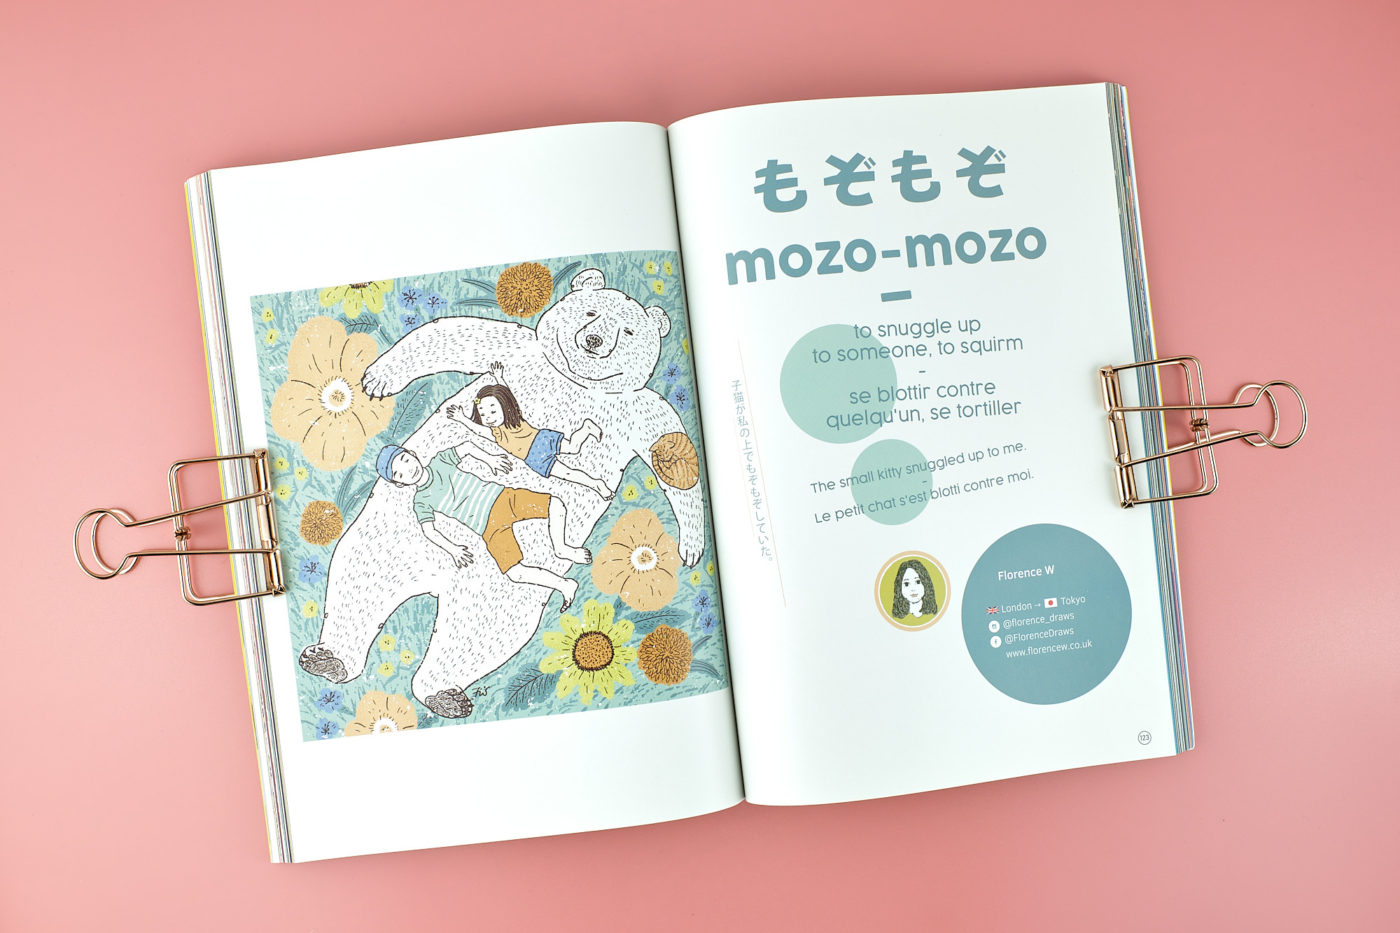 mozo-mozo by Florence W